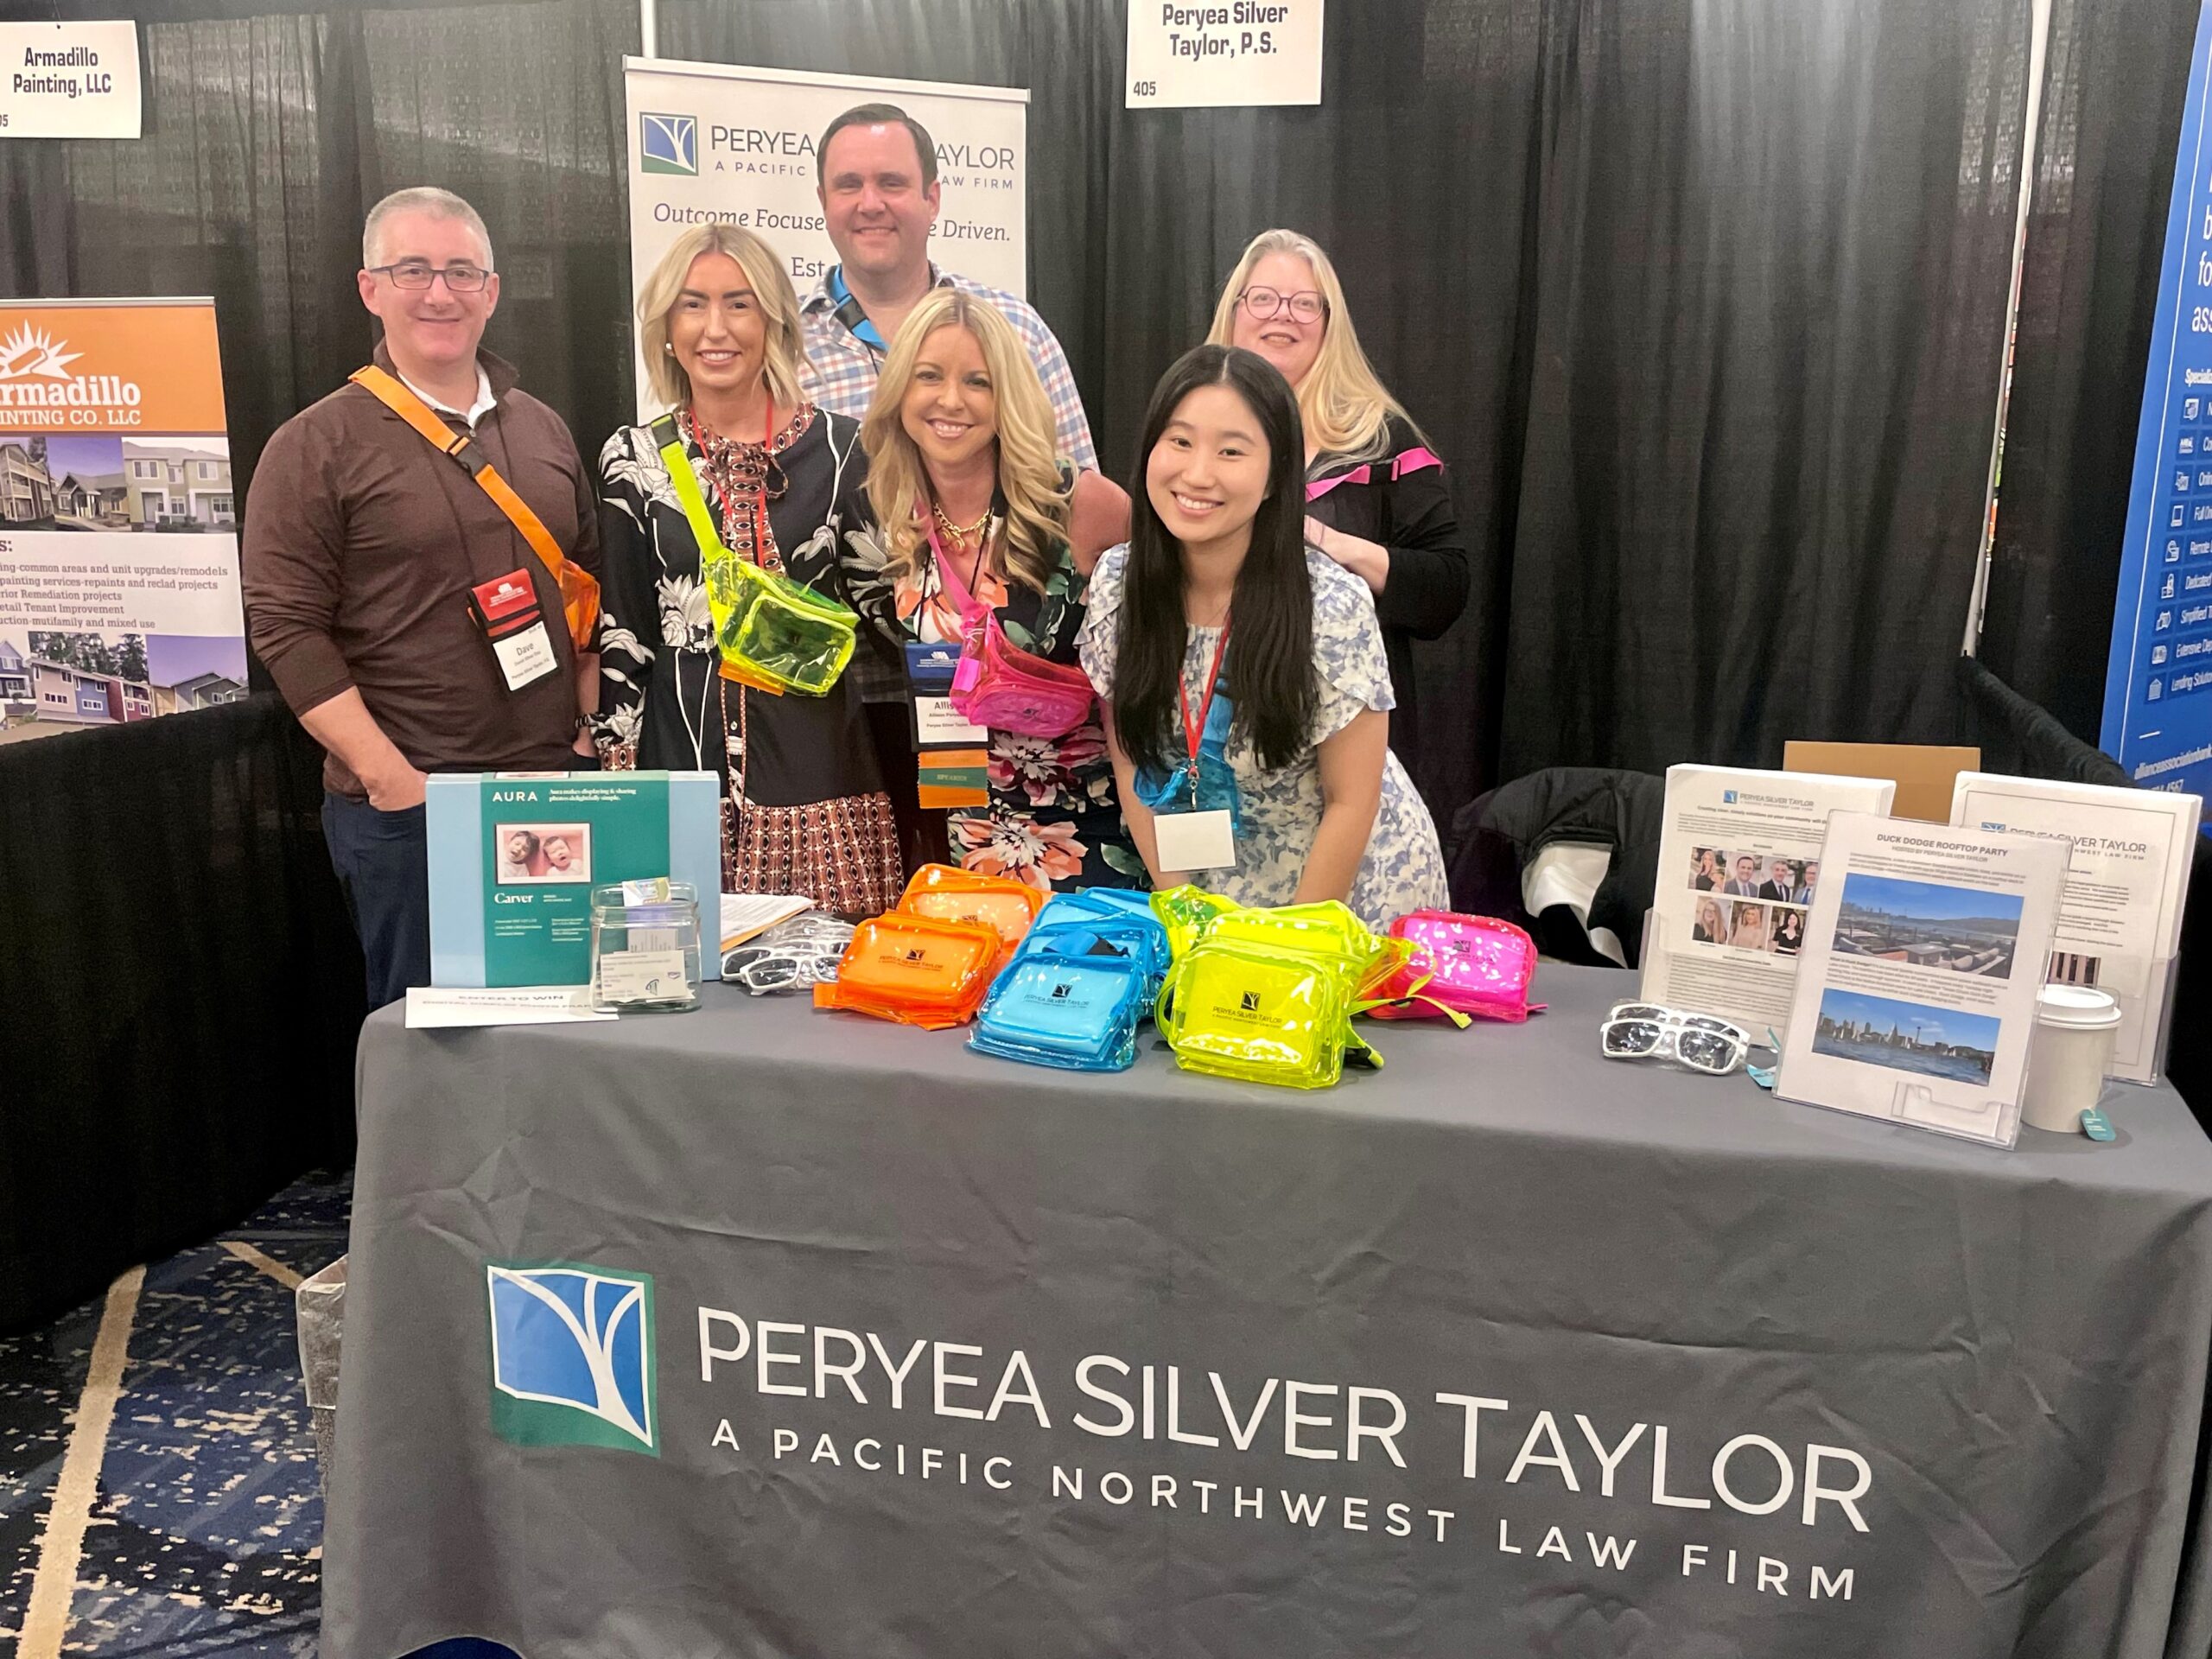 Group photo of professionals At an Event of Peryea Silver Taylor